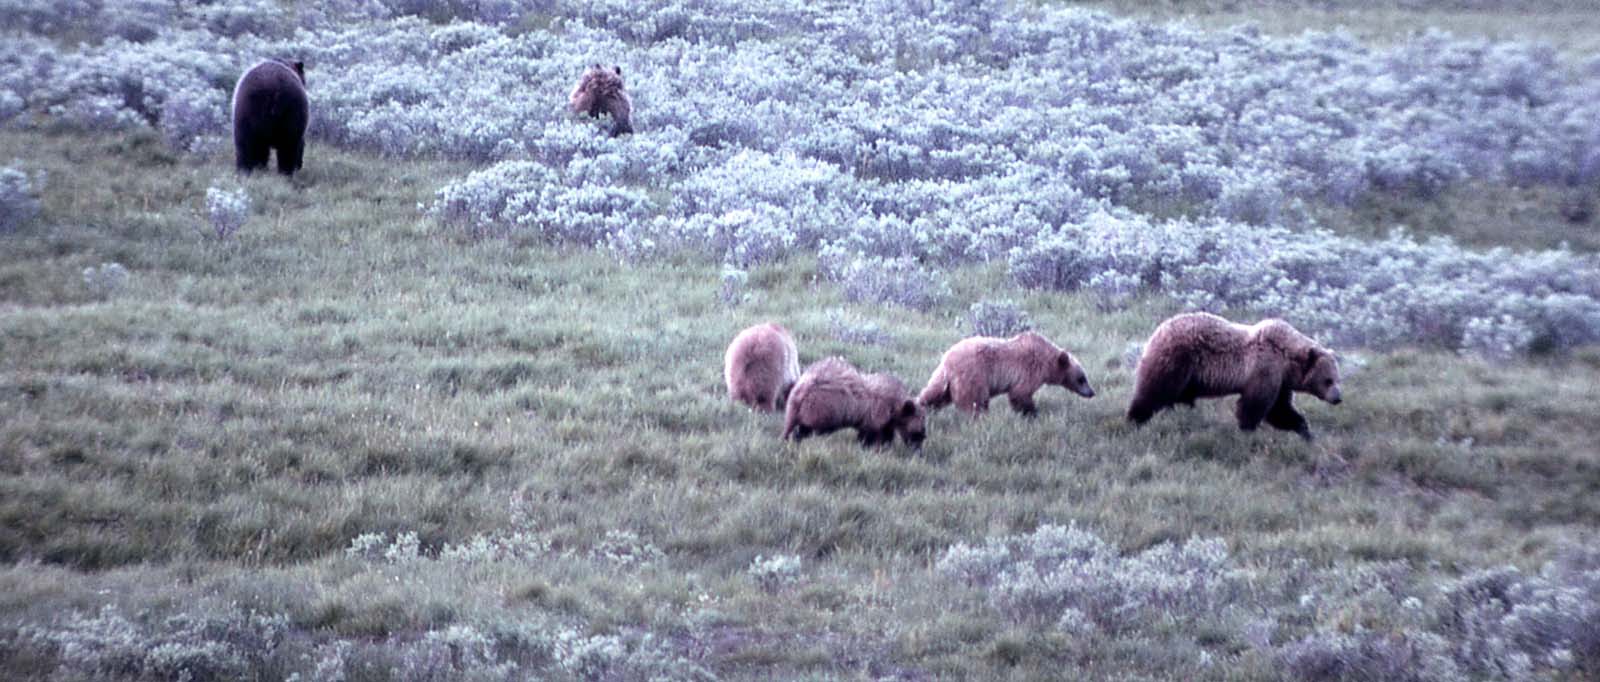 Grizzly bears in Hayden Valley, Yellowstone National Park. NPS photo by John Good, 1964.